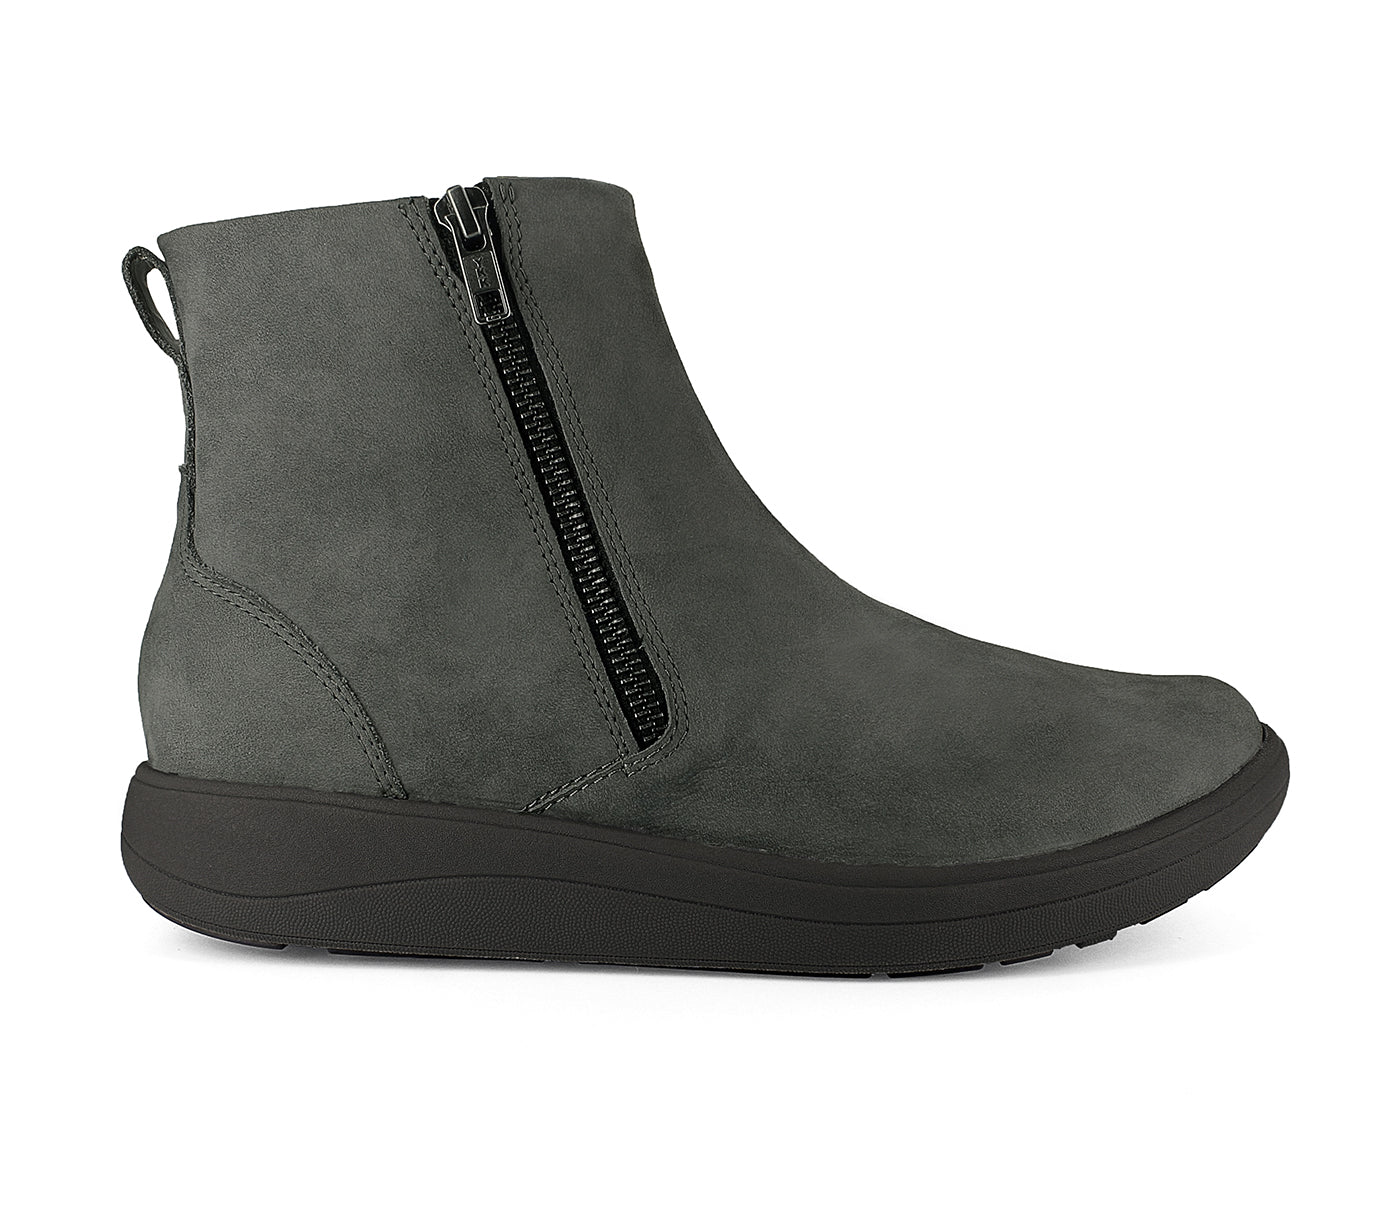 Strive Bamford II Ladies Dark Grey Leather Arch Support Twin Zip Ankle Boots